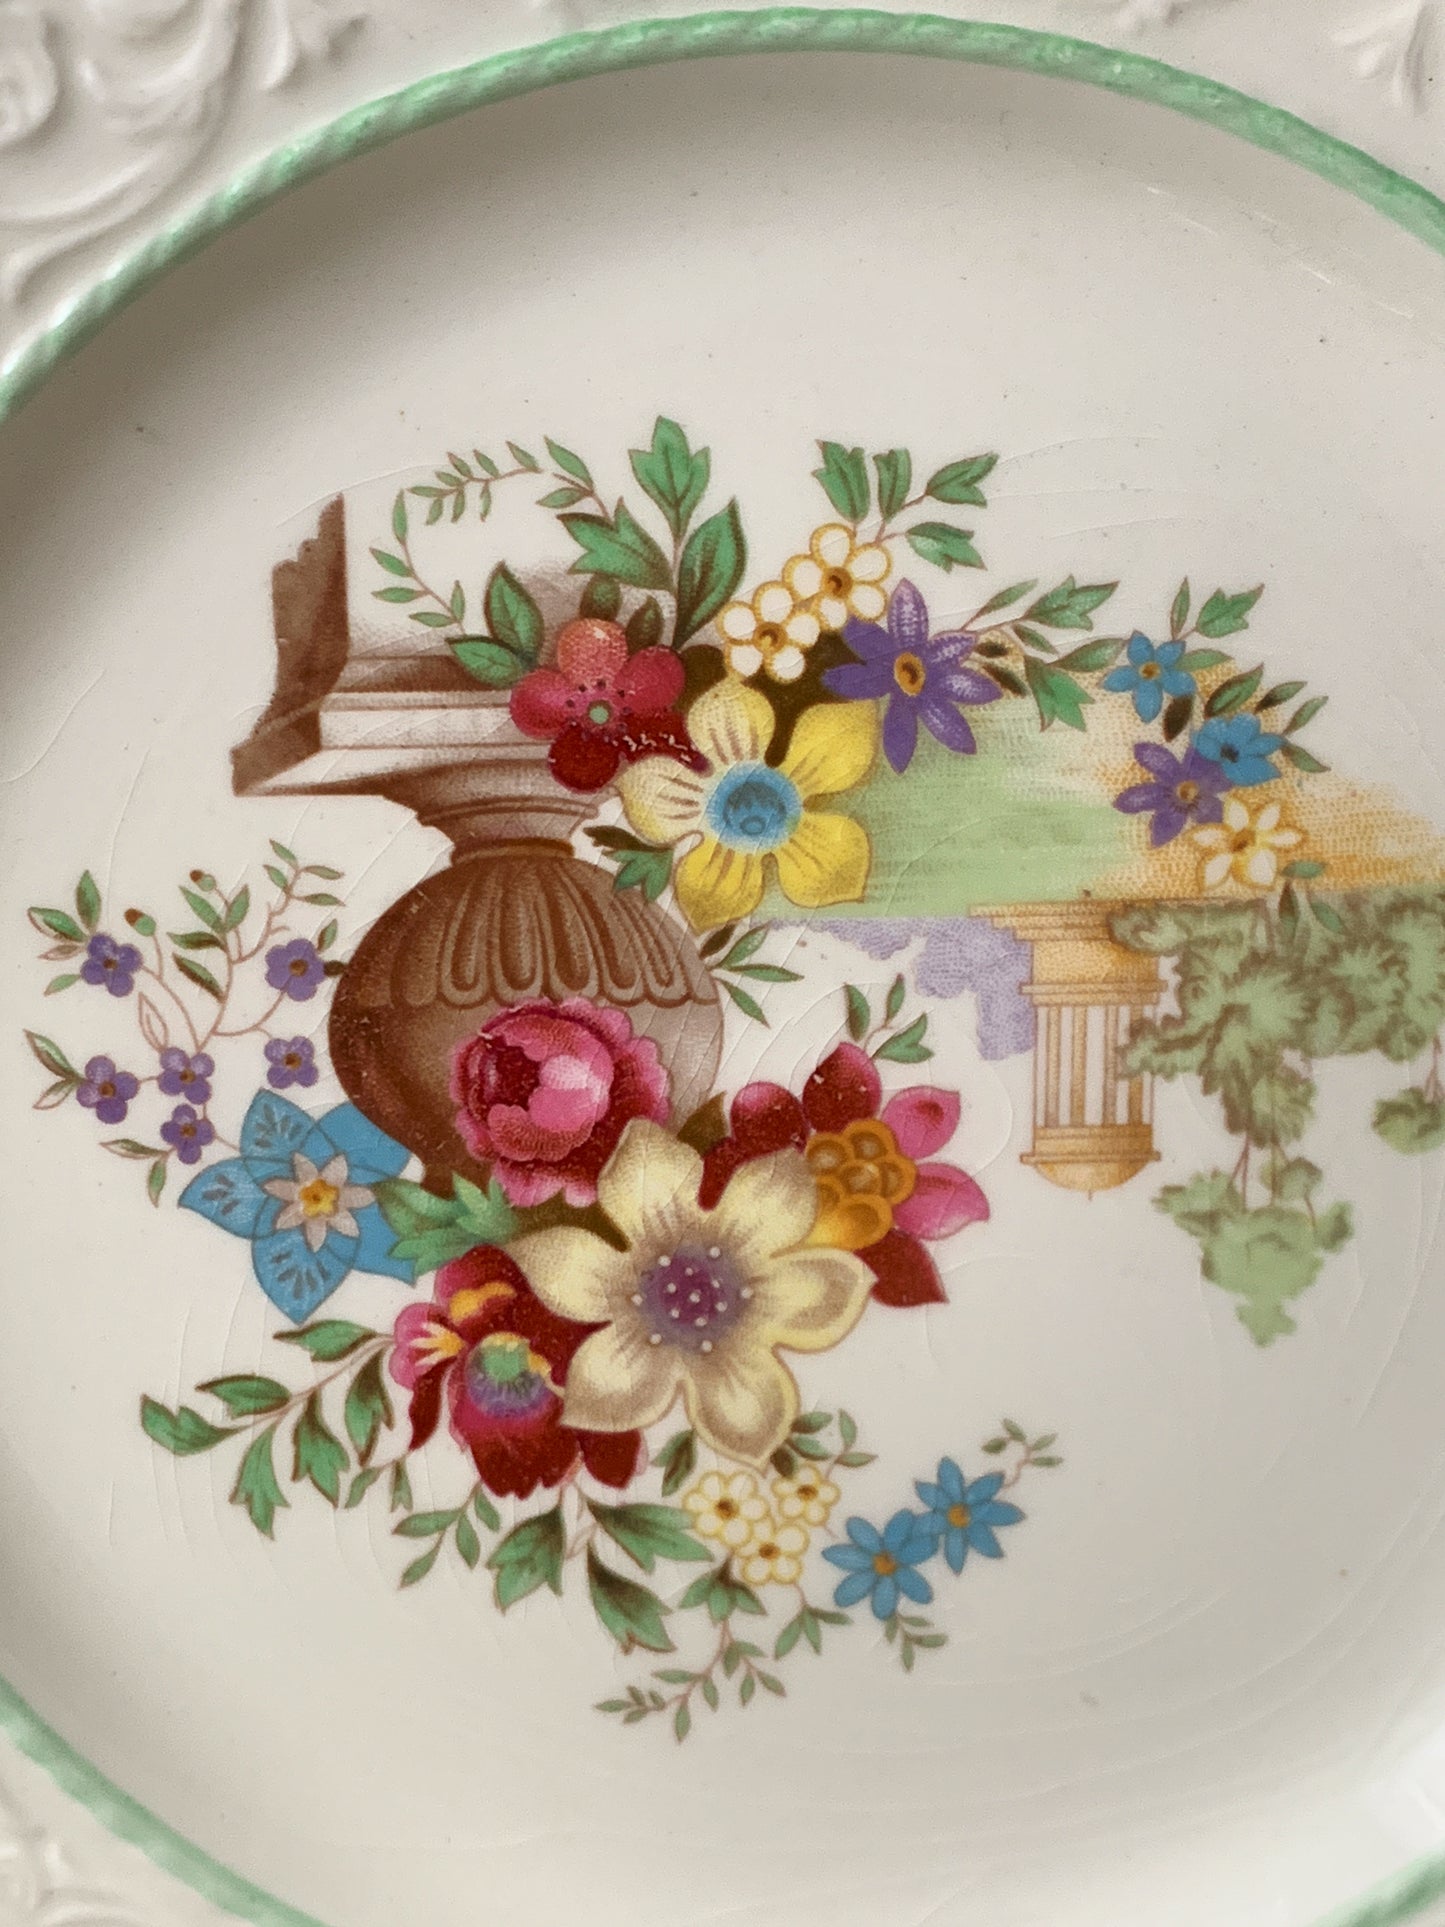 Royal Winton Antique China Plate with Raised Design Floral Pattern